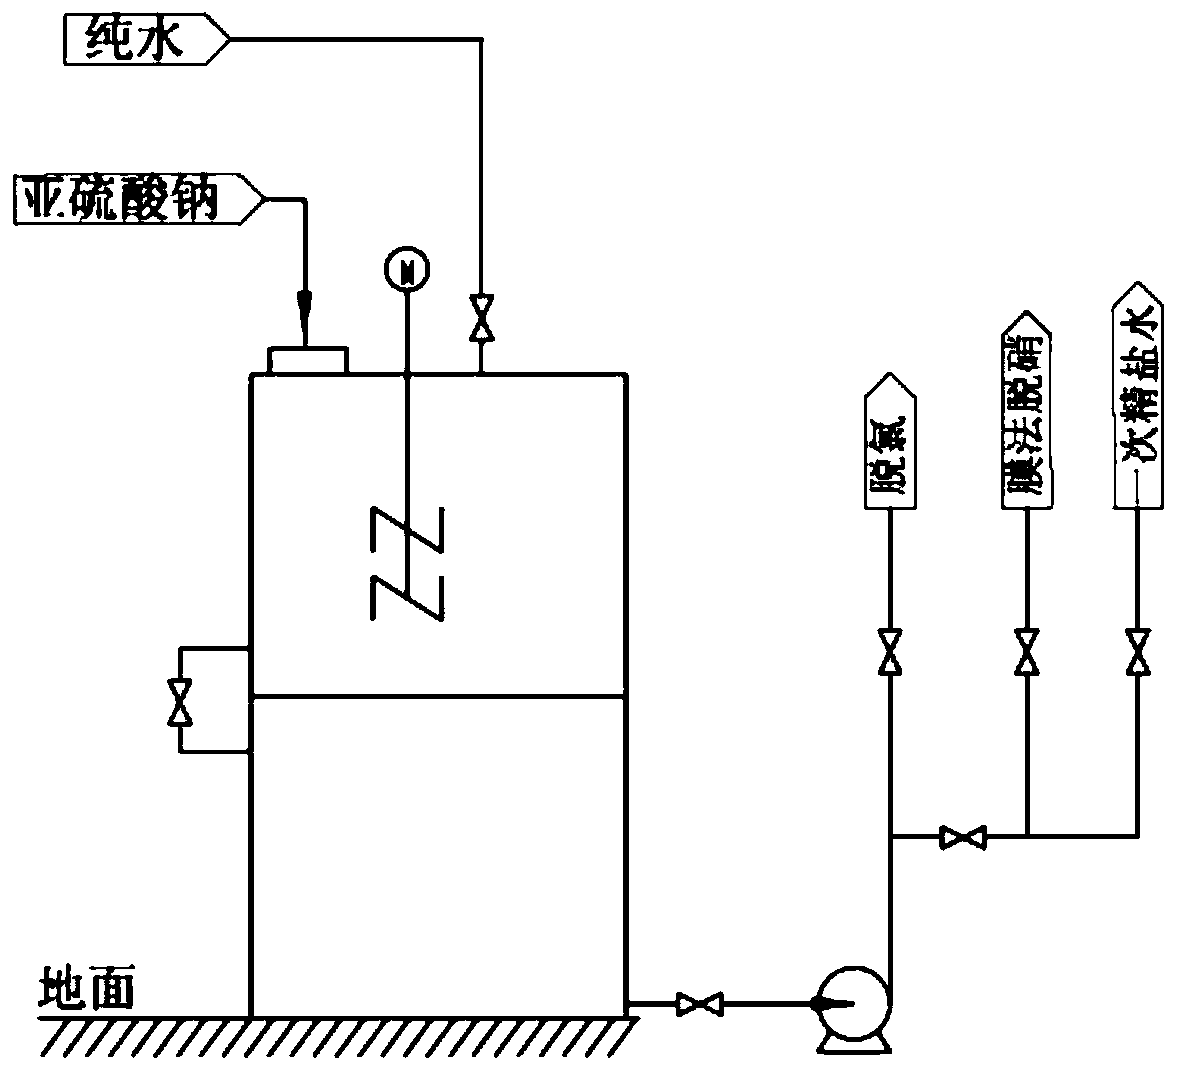 Preparation tank and preparation system for sodium sulfite solution used for chlor-alkali industry